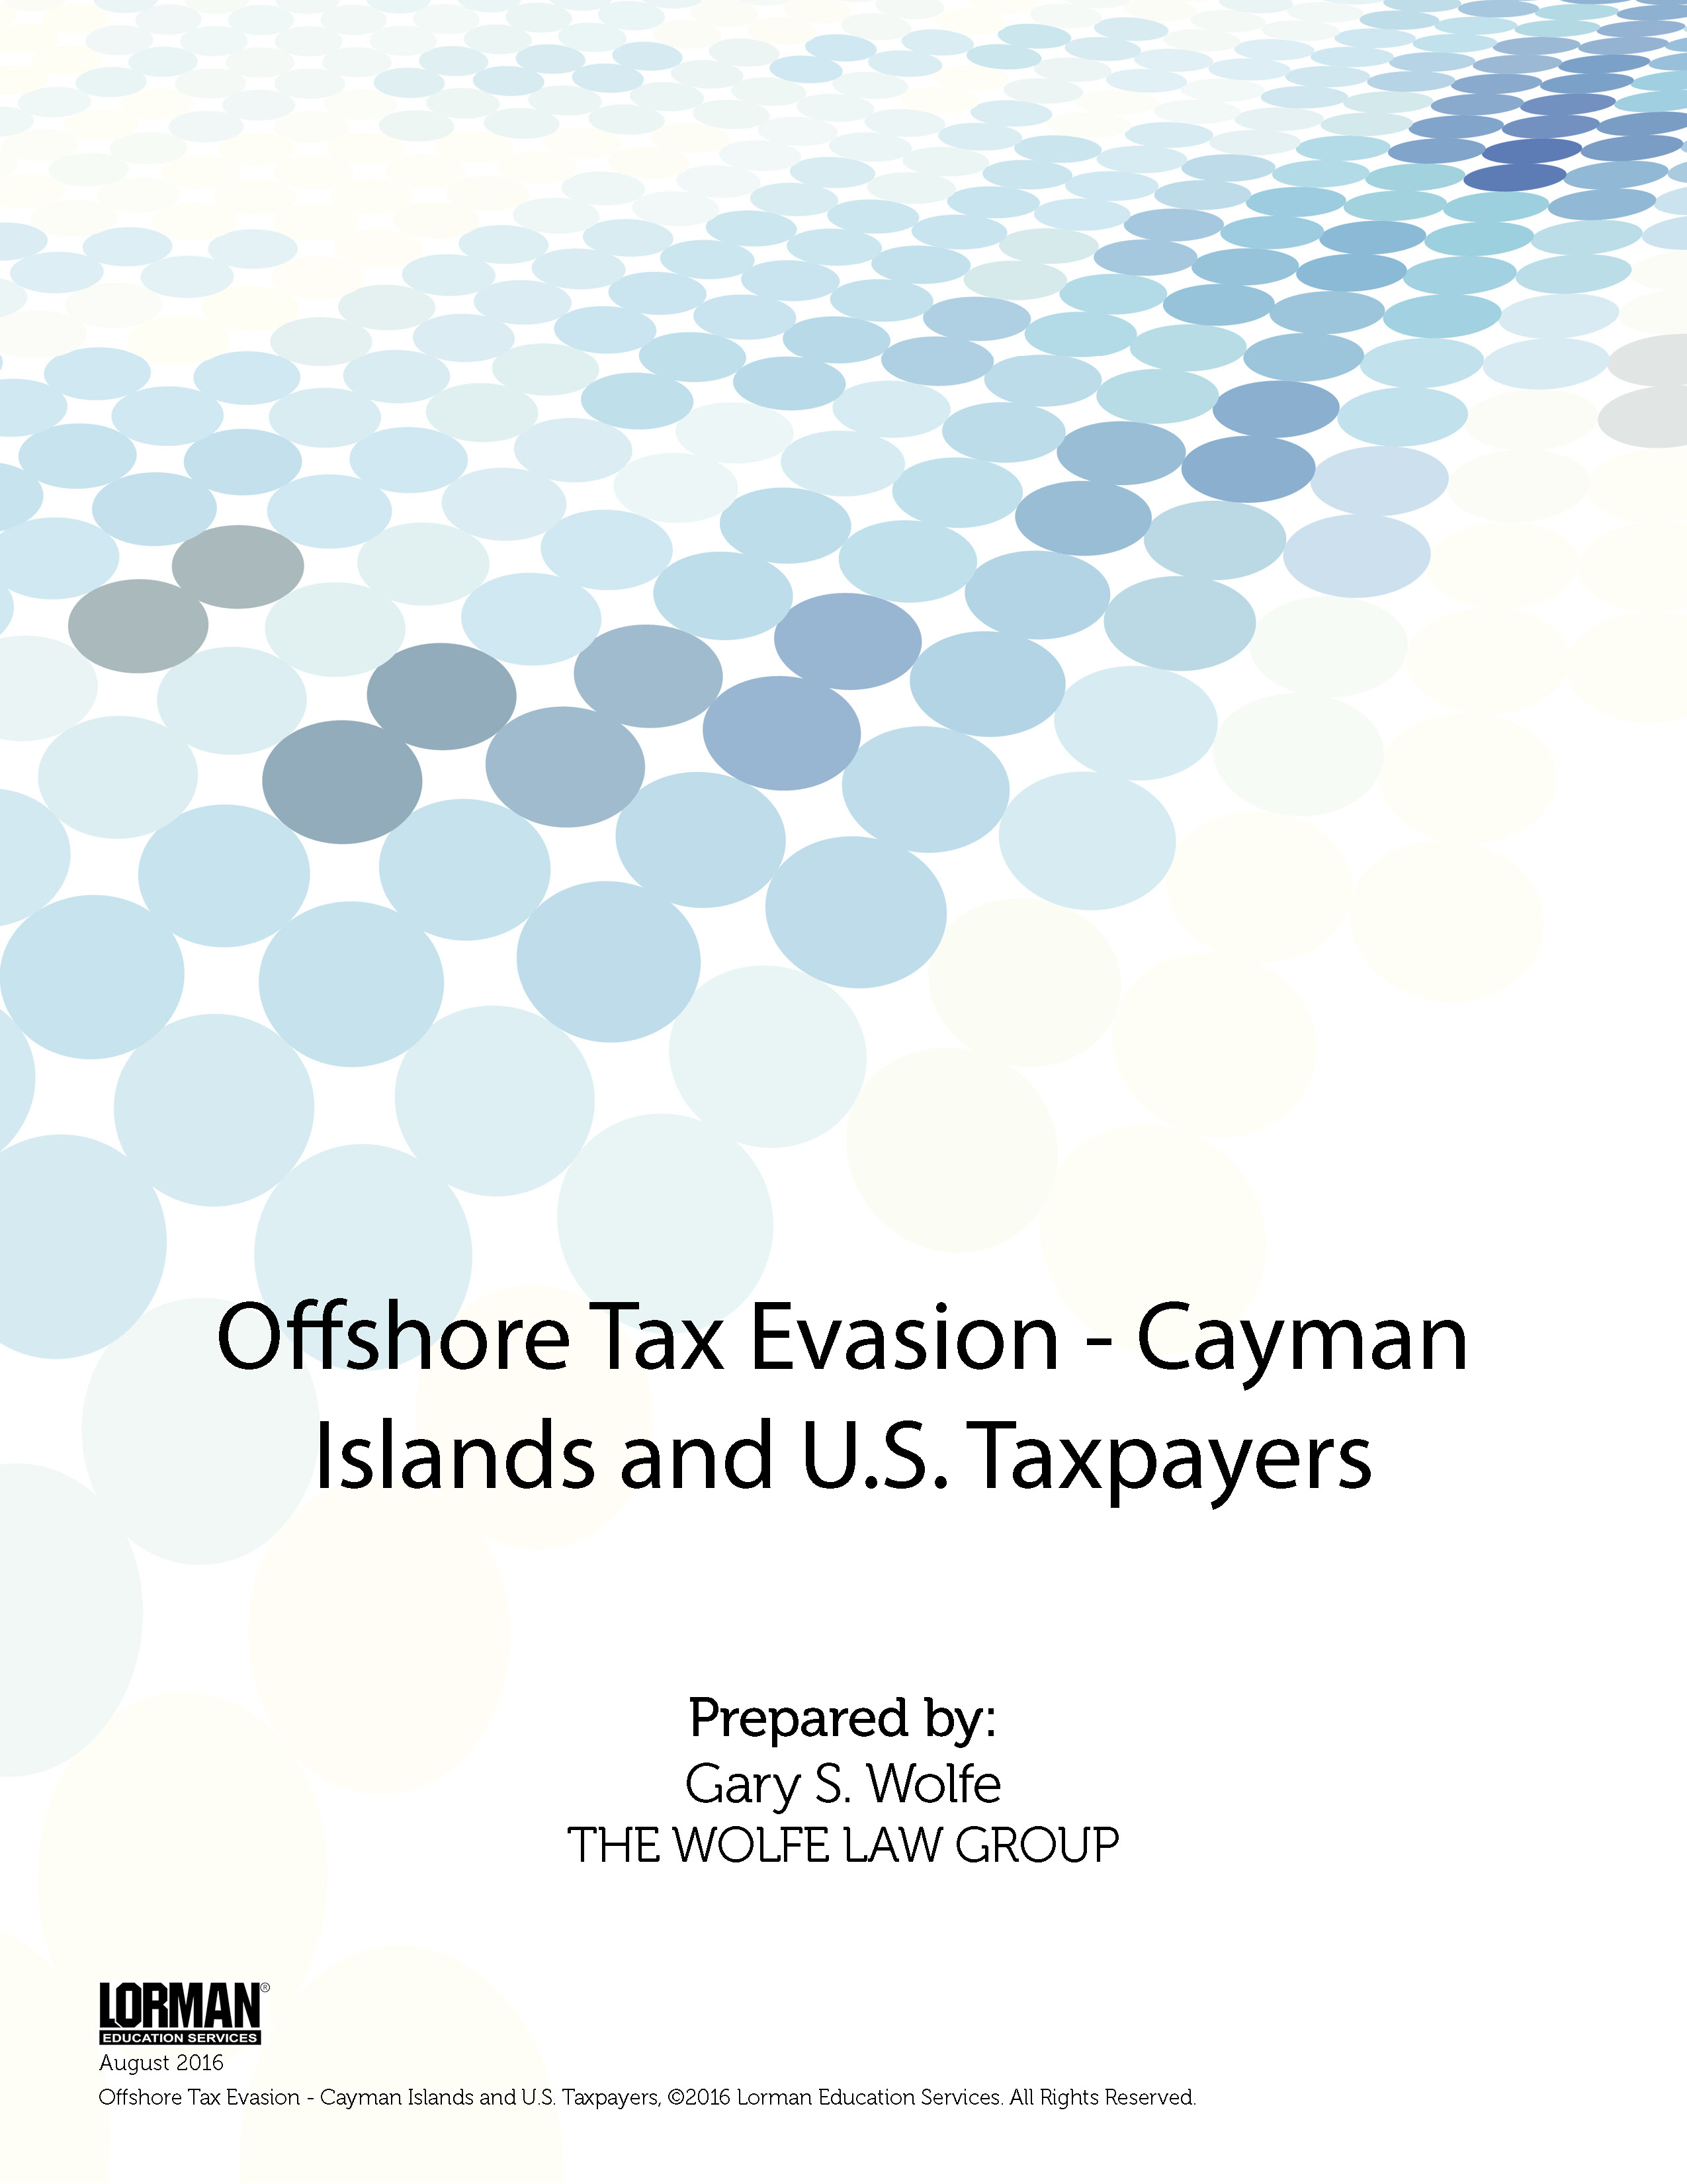 Offshore Tax Evasion - Cayman Islands and U.S. Taxpayers